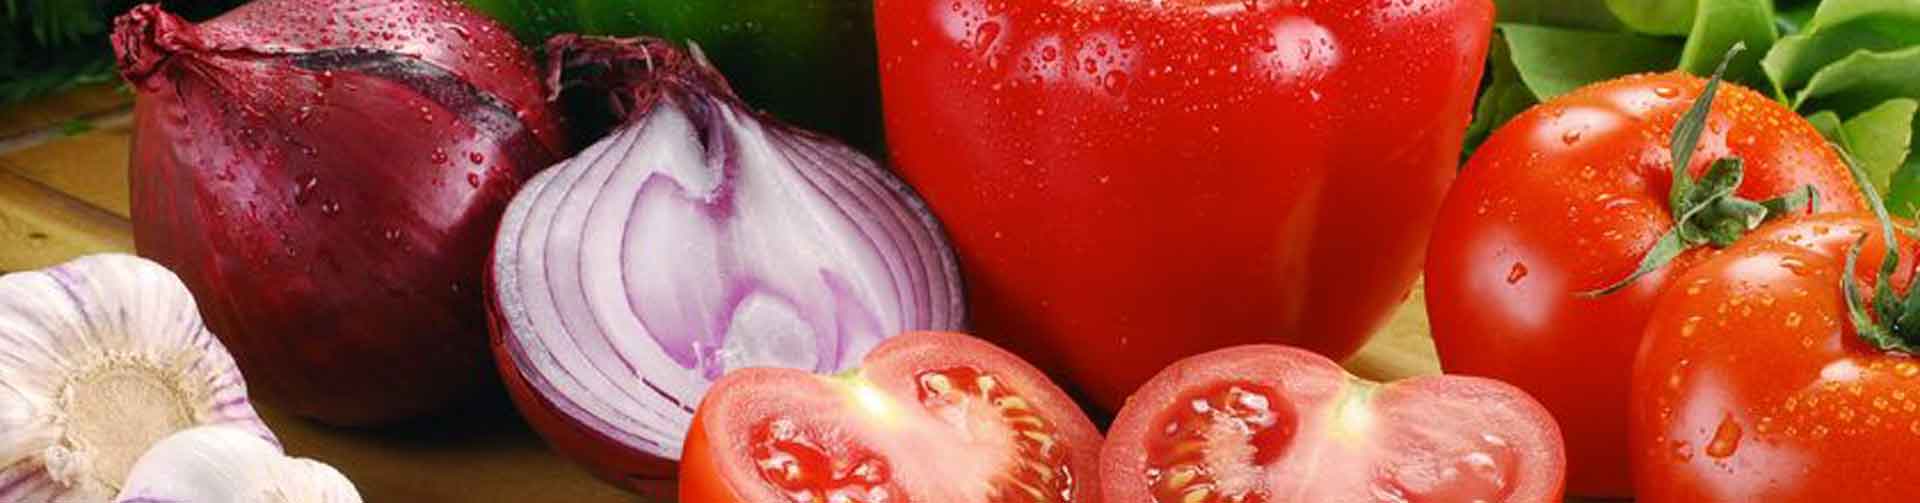 tomatoes, onions, other california produce